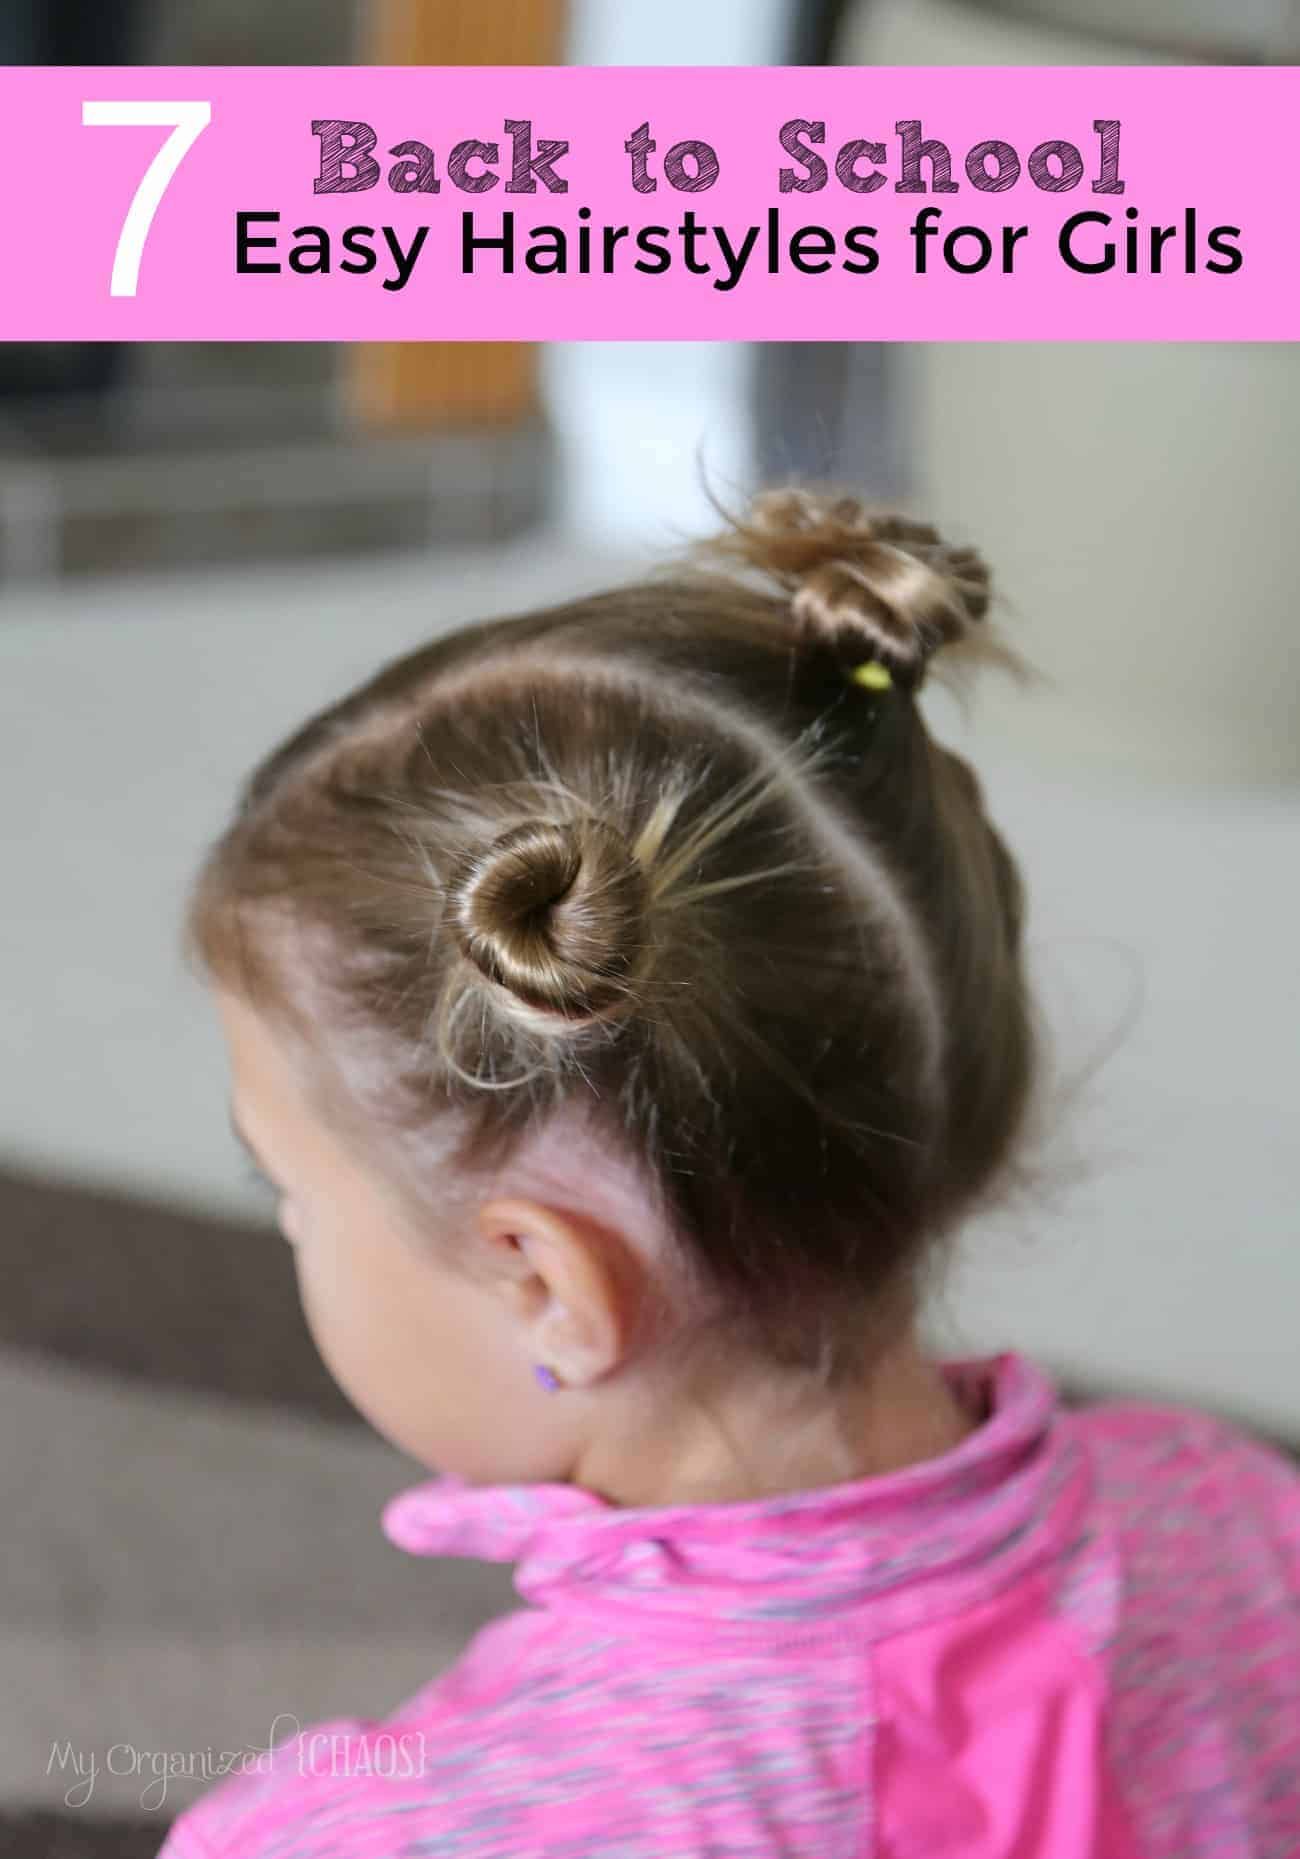 Tips for Your Child's First Haircut